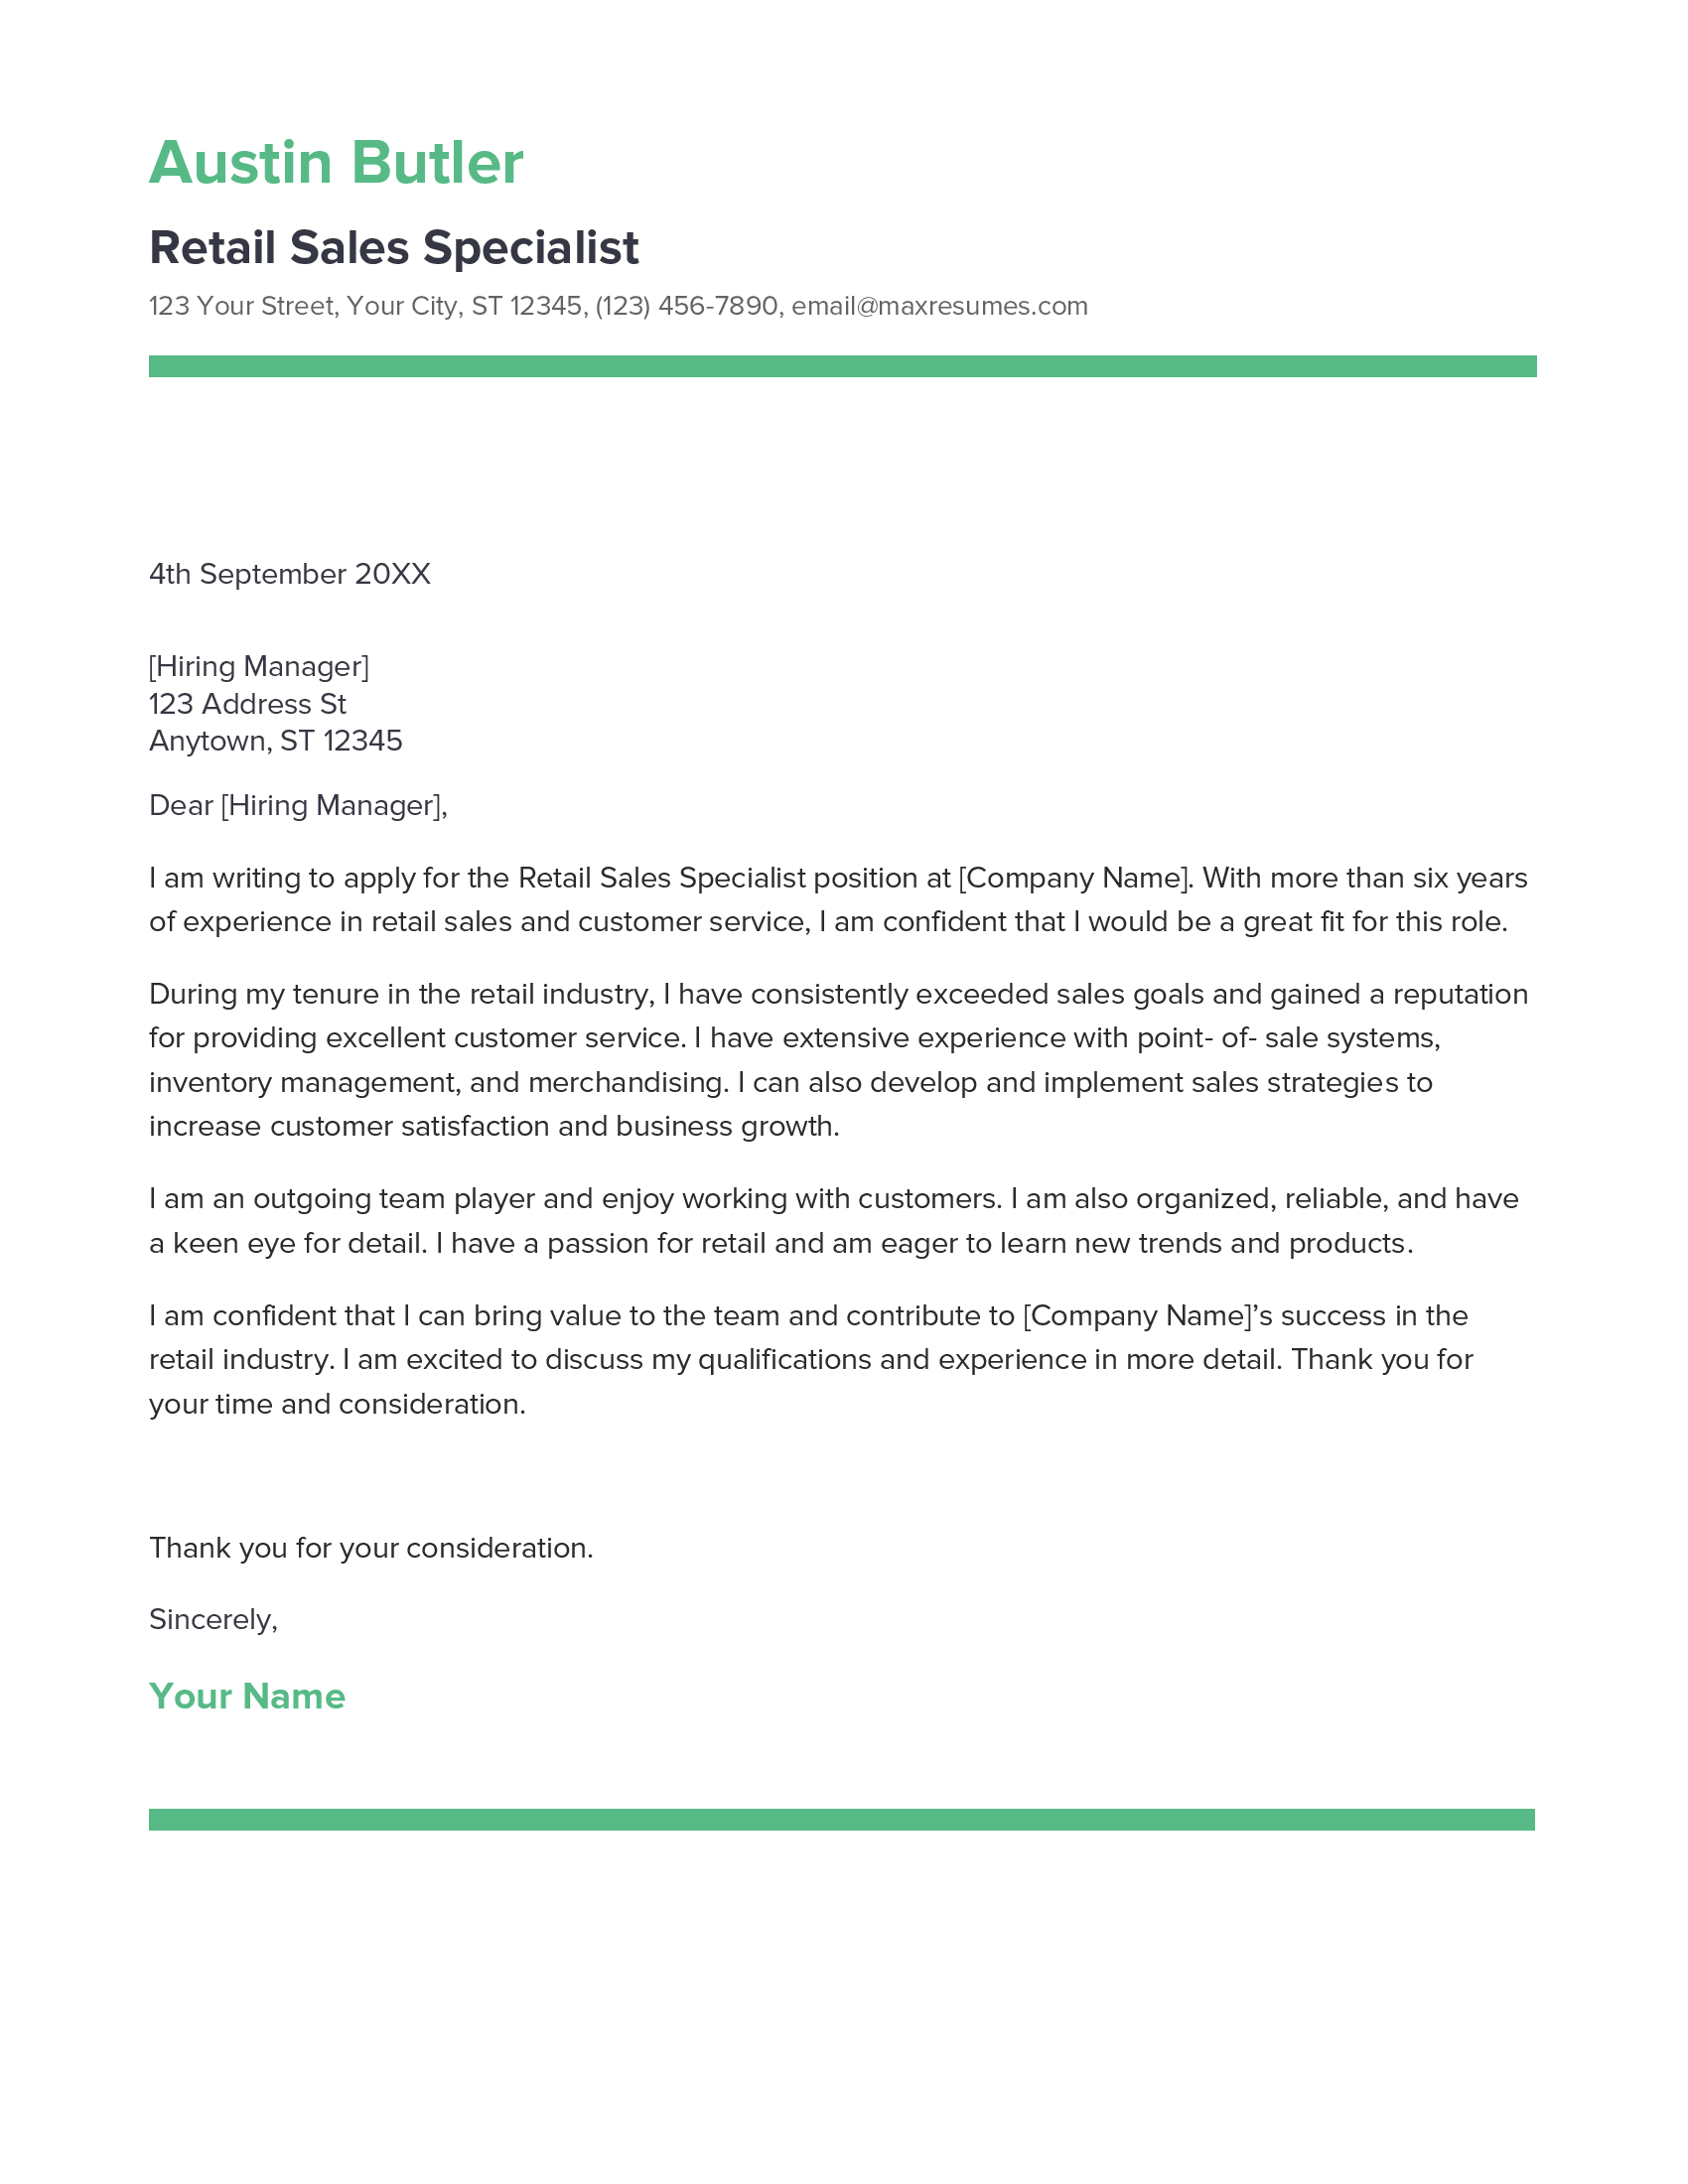 Retail Sales Specialist Cover Letter Example